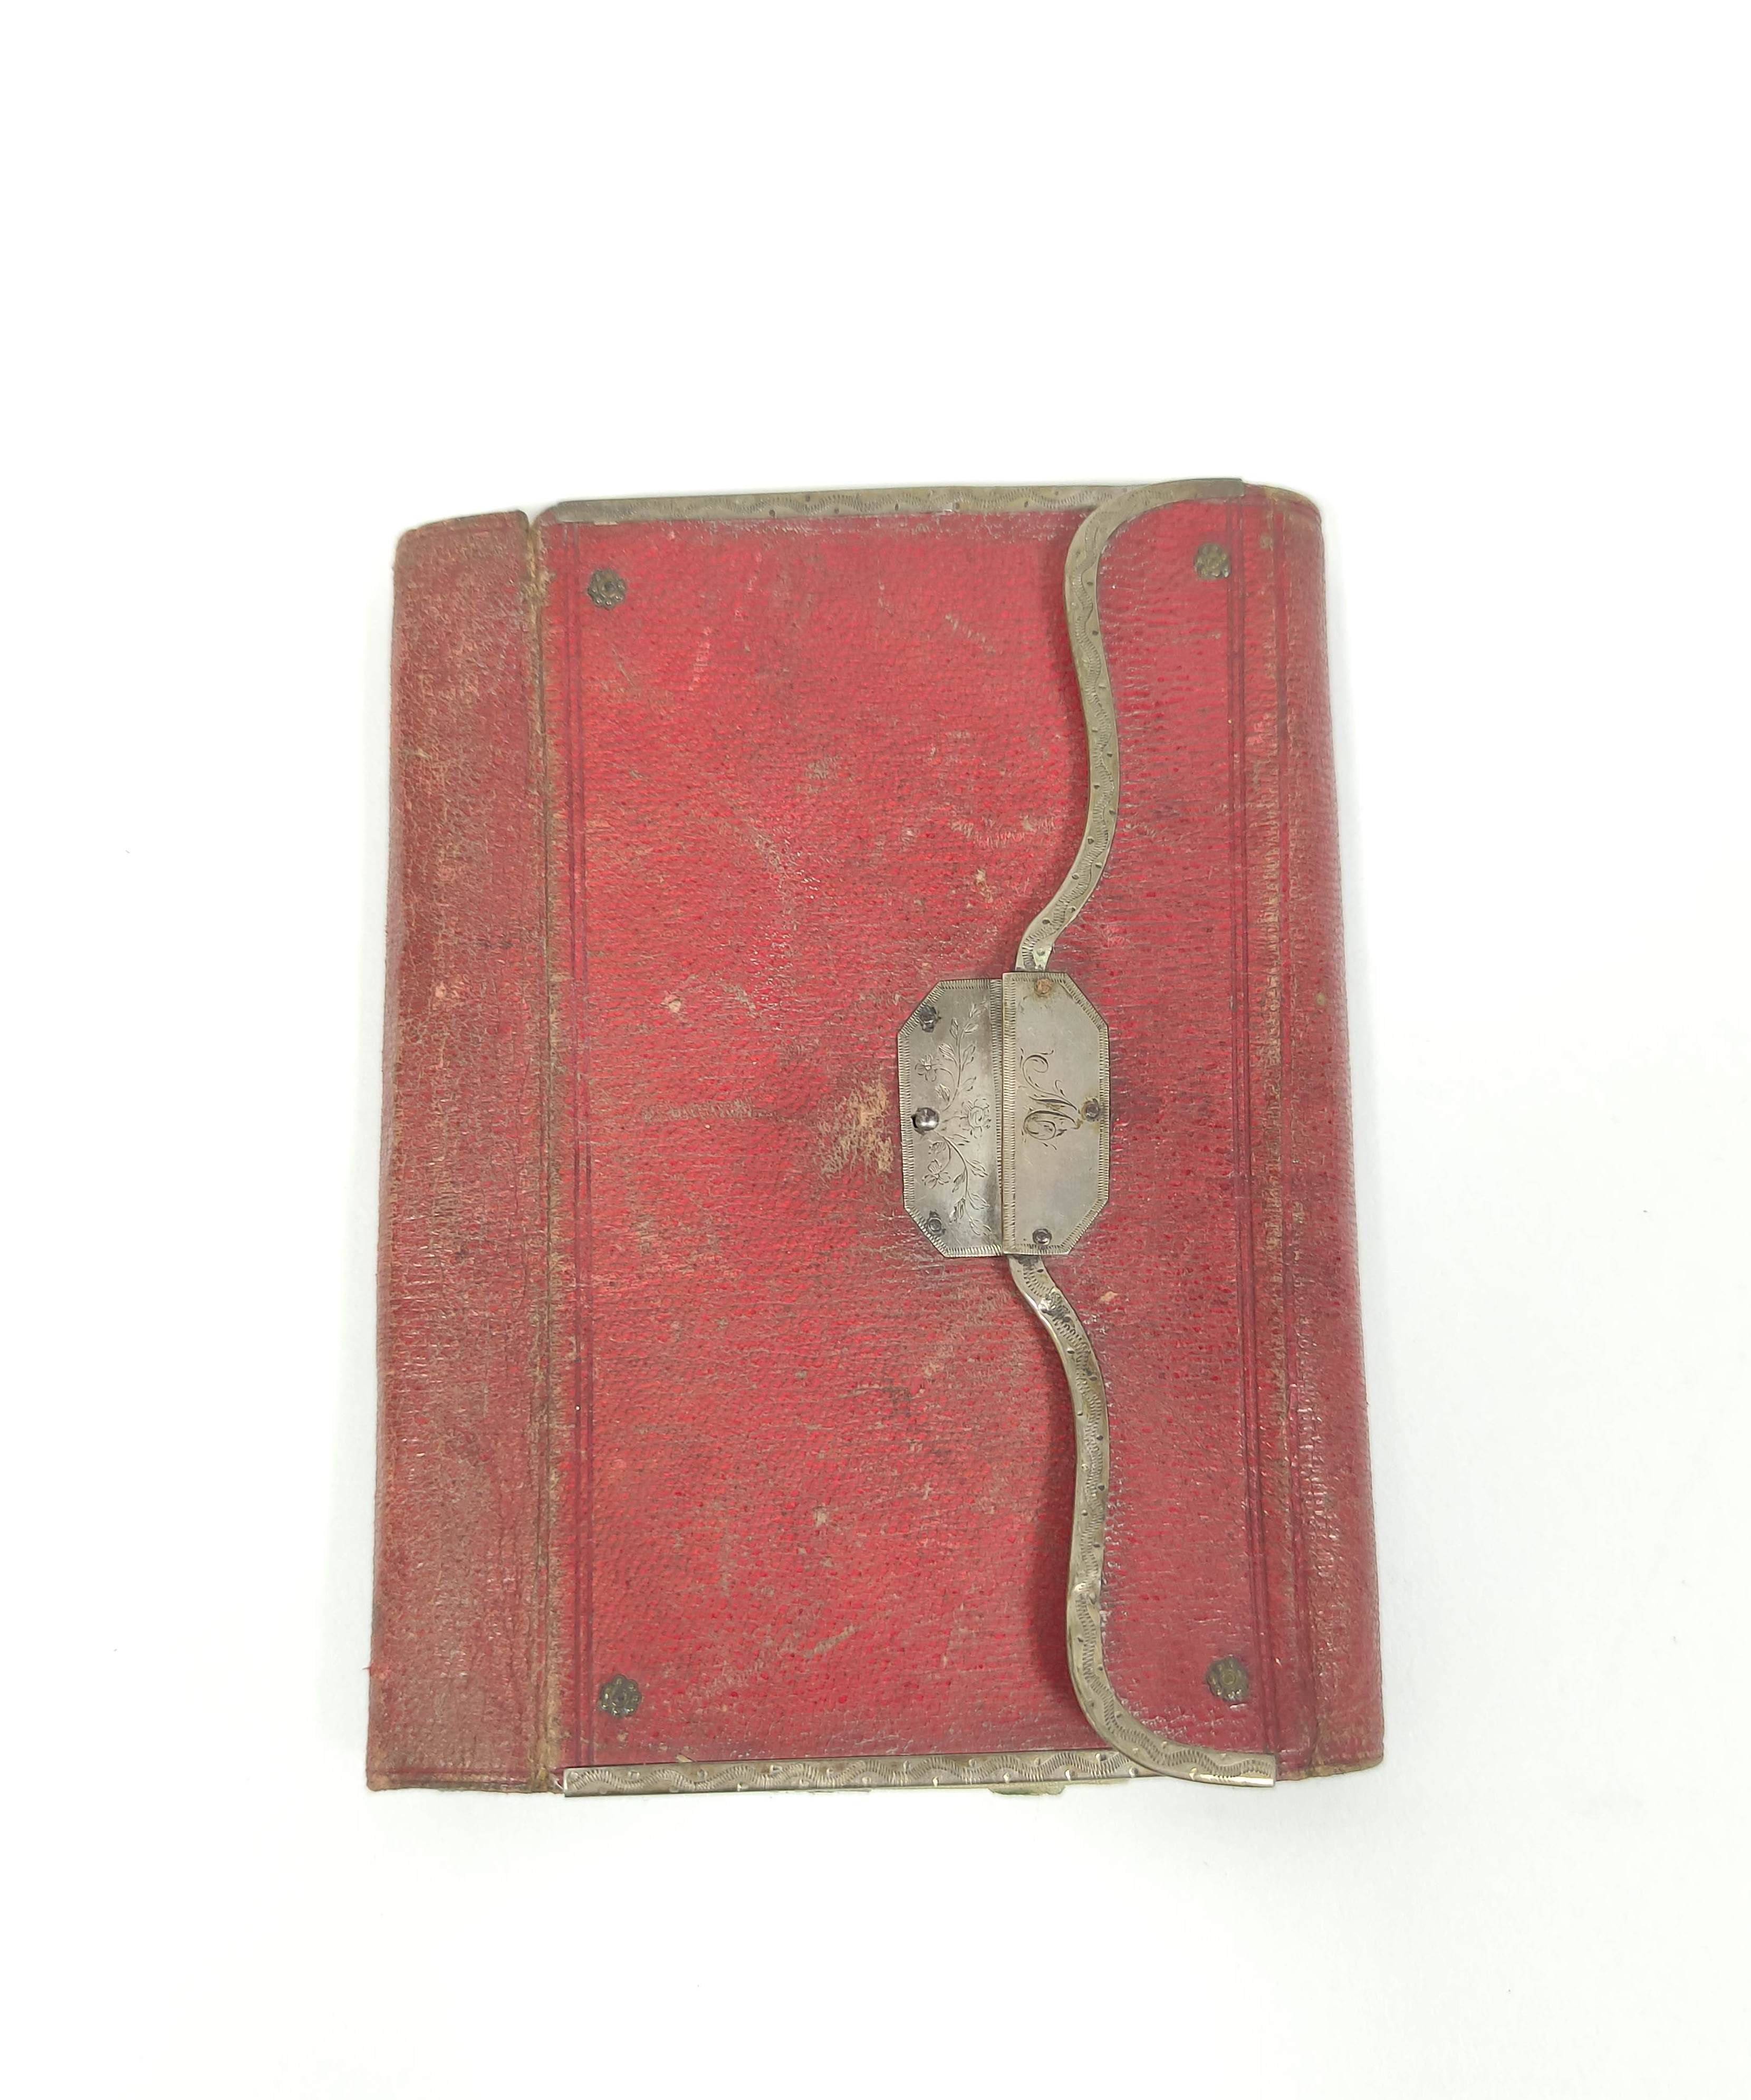 Georgian morocco purse or wallet with silver initialled mounts, with green silk lining, c1790, 11.